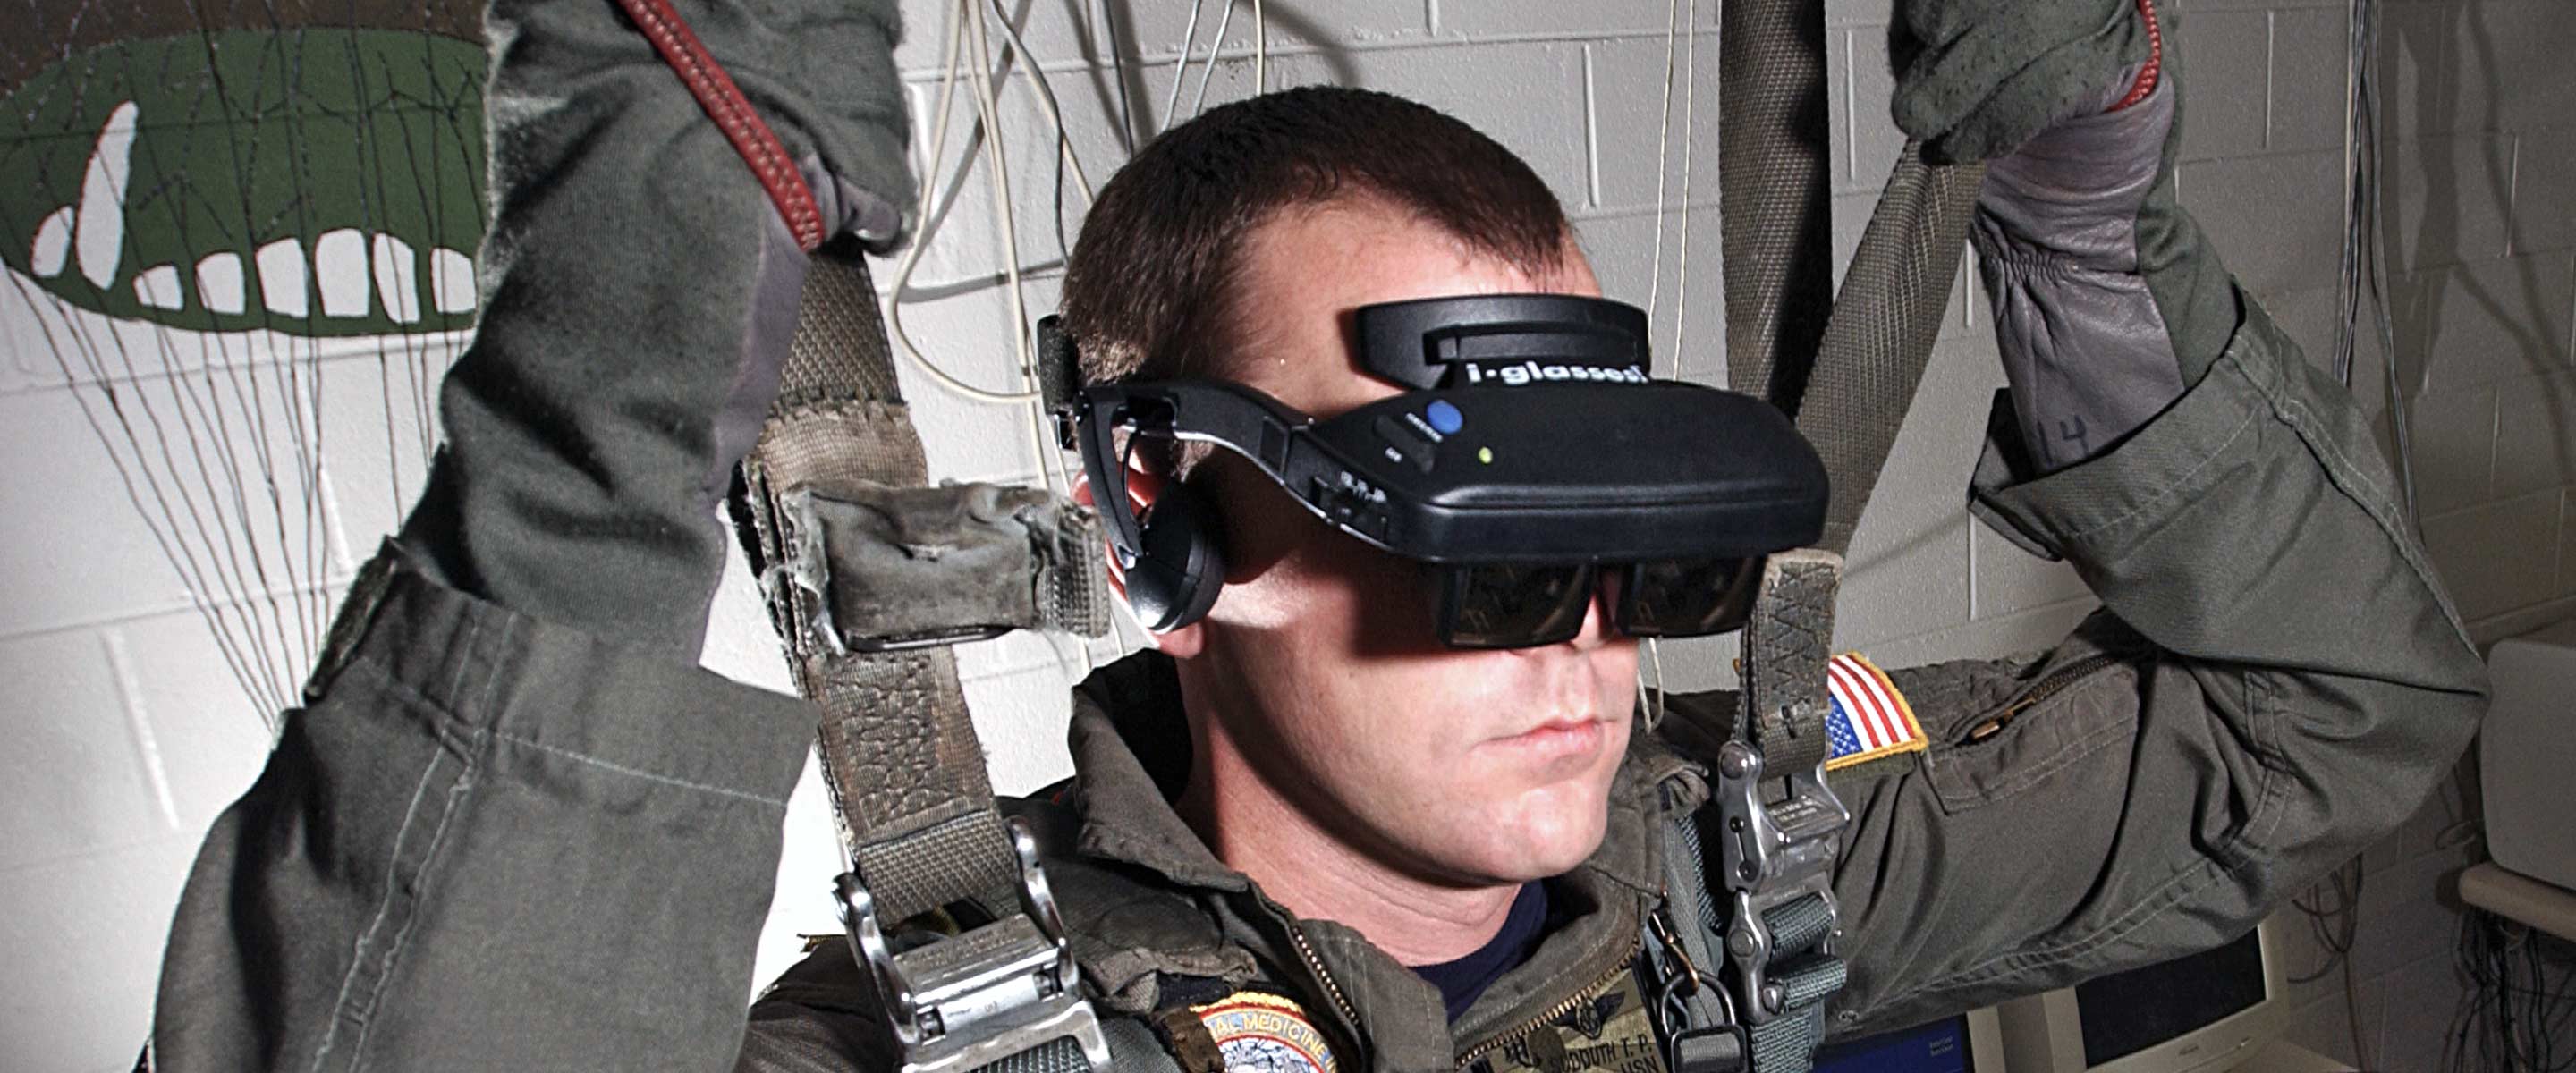 Navy Research Psychologist simulates parachuting with a VR experience